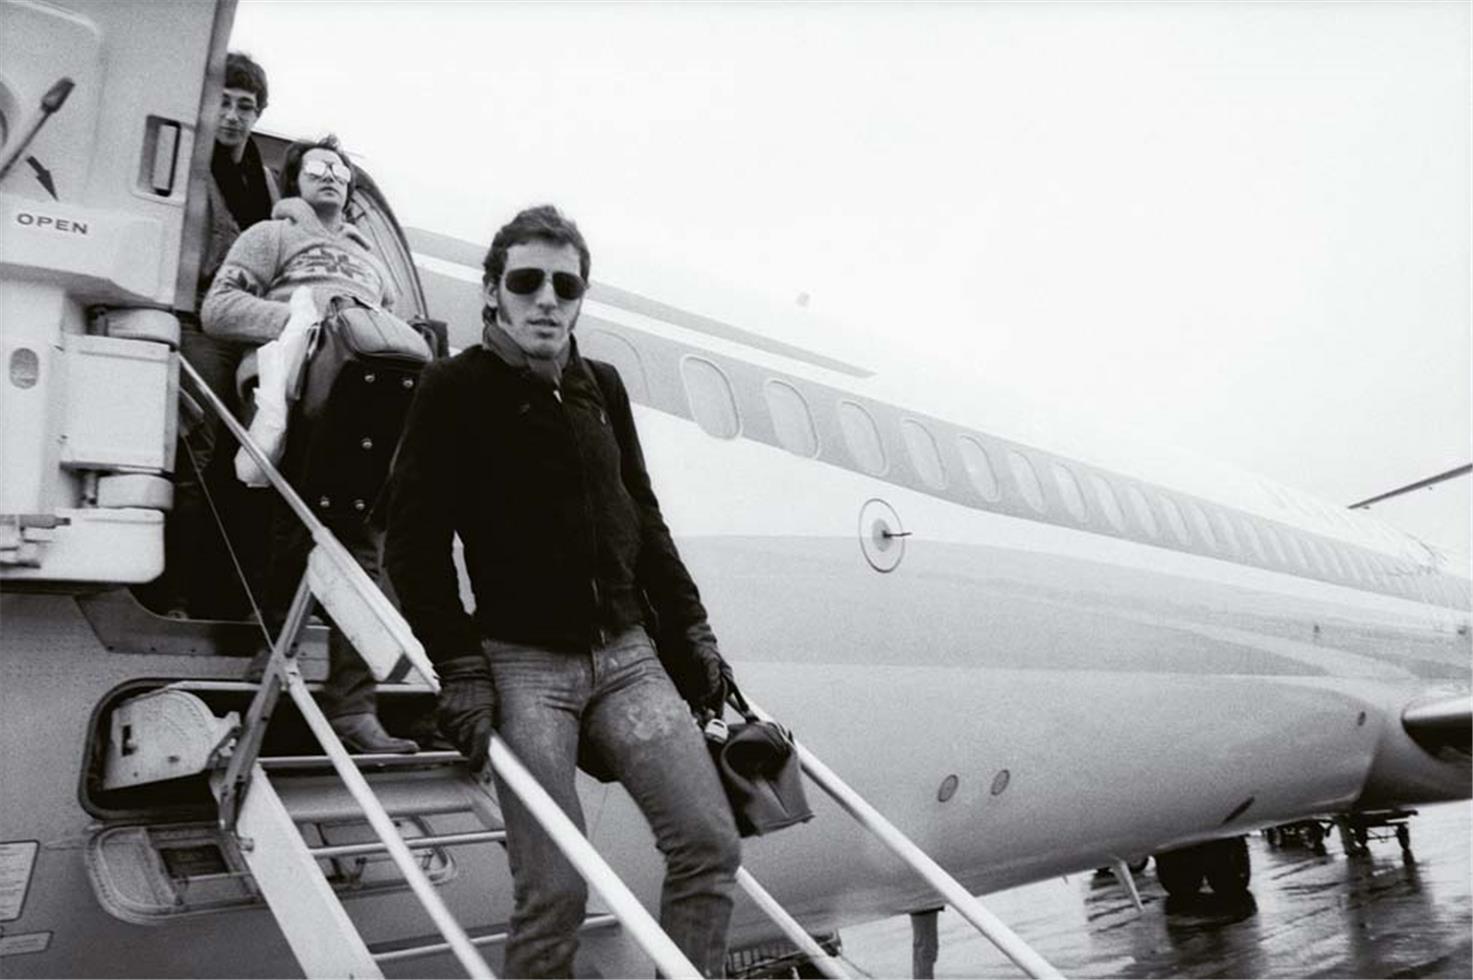 Jim Marchese Black and White Photograph - Coming off the Plane, Bruce Springsteen